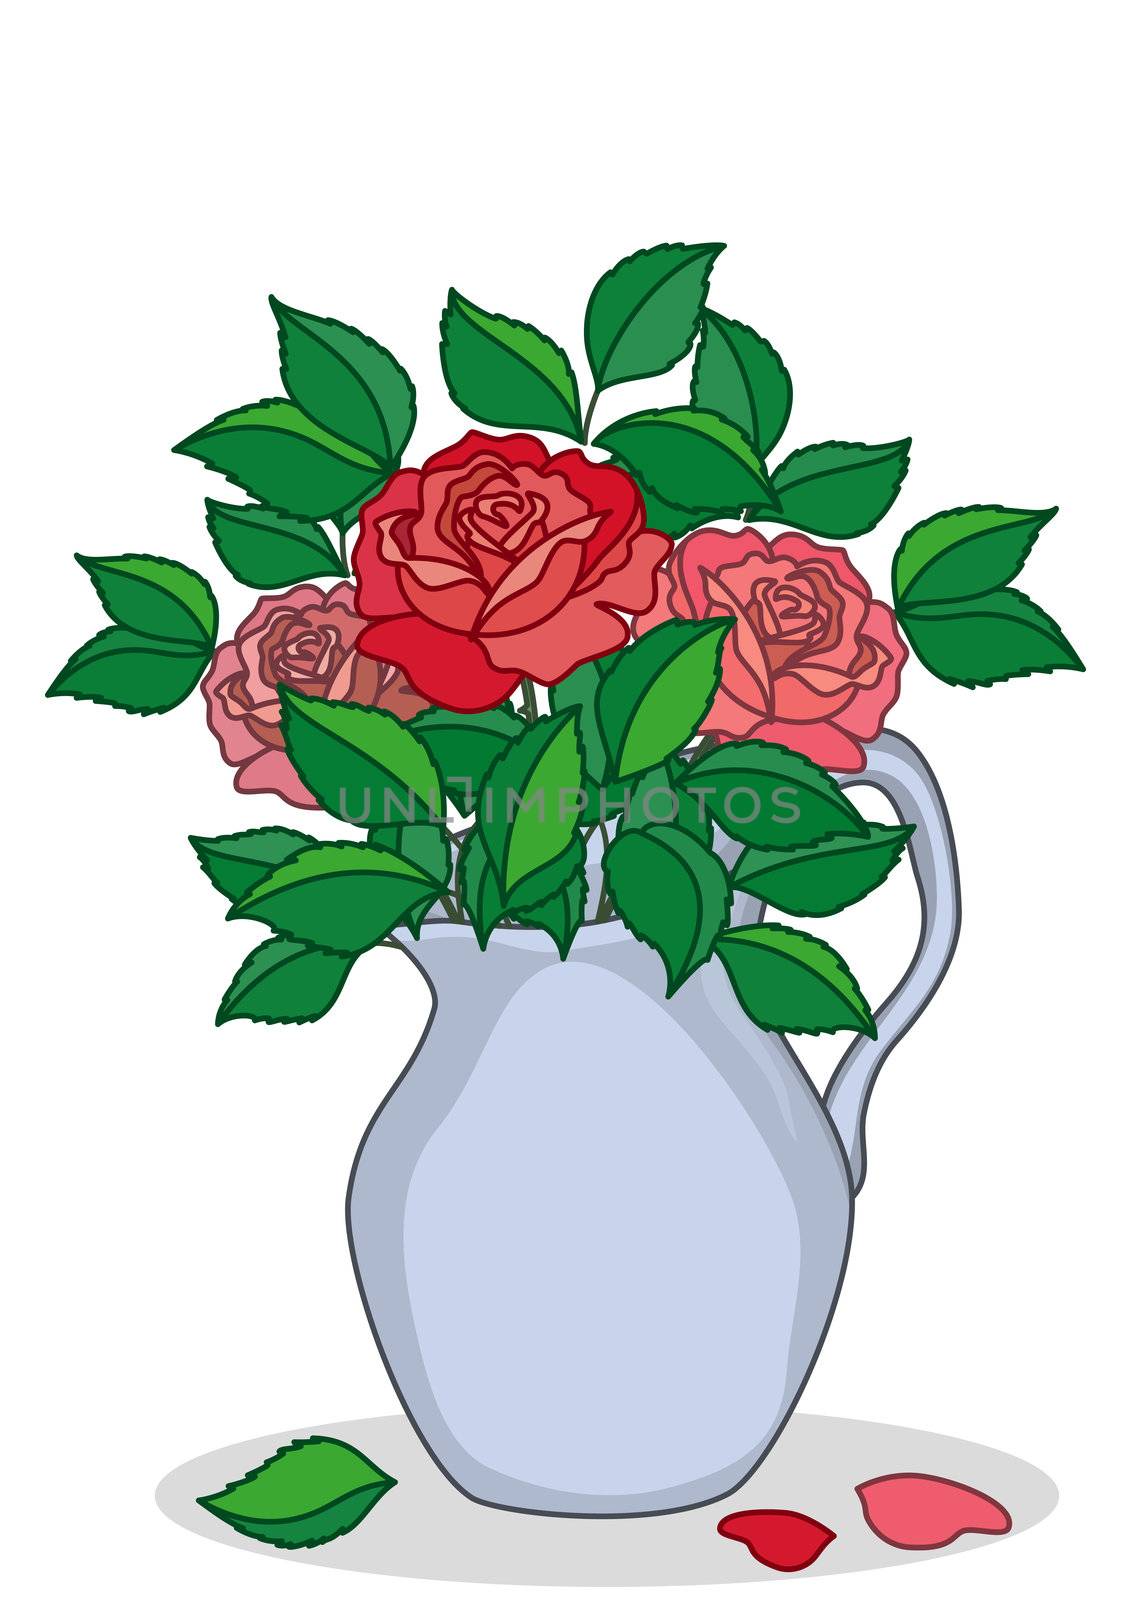 Jug with roses by alexcoolok